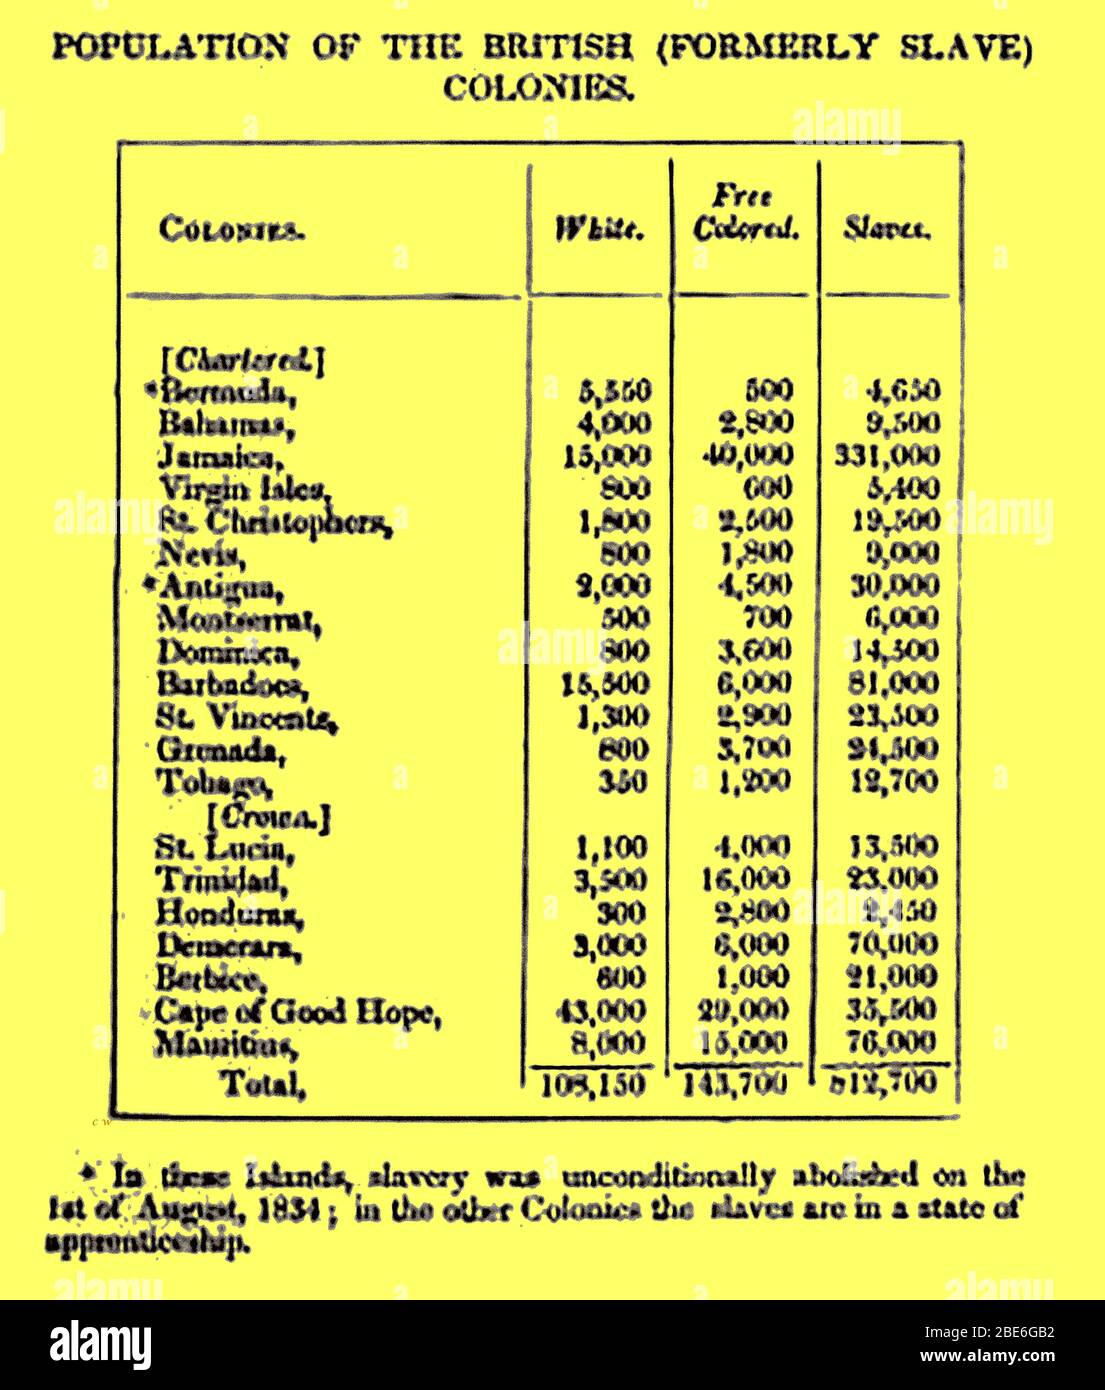 SLAVERY - An 1835  British printed table listing the population of British (formerly slave) colonies, listing white, free coloured and slave groups. Stock Photo